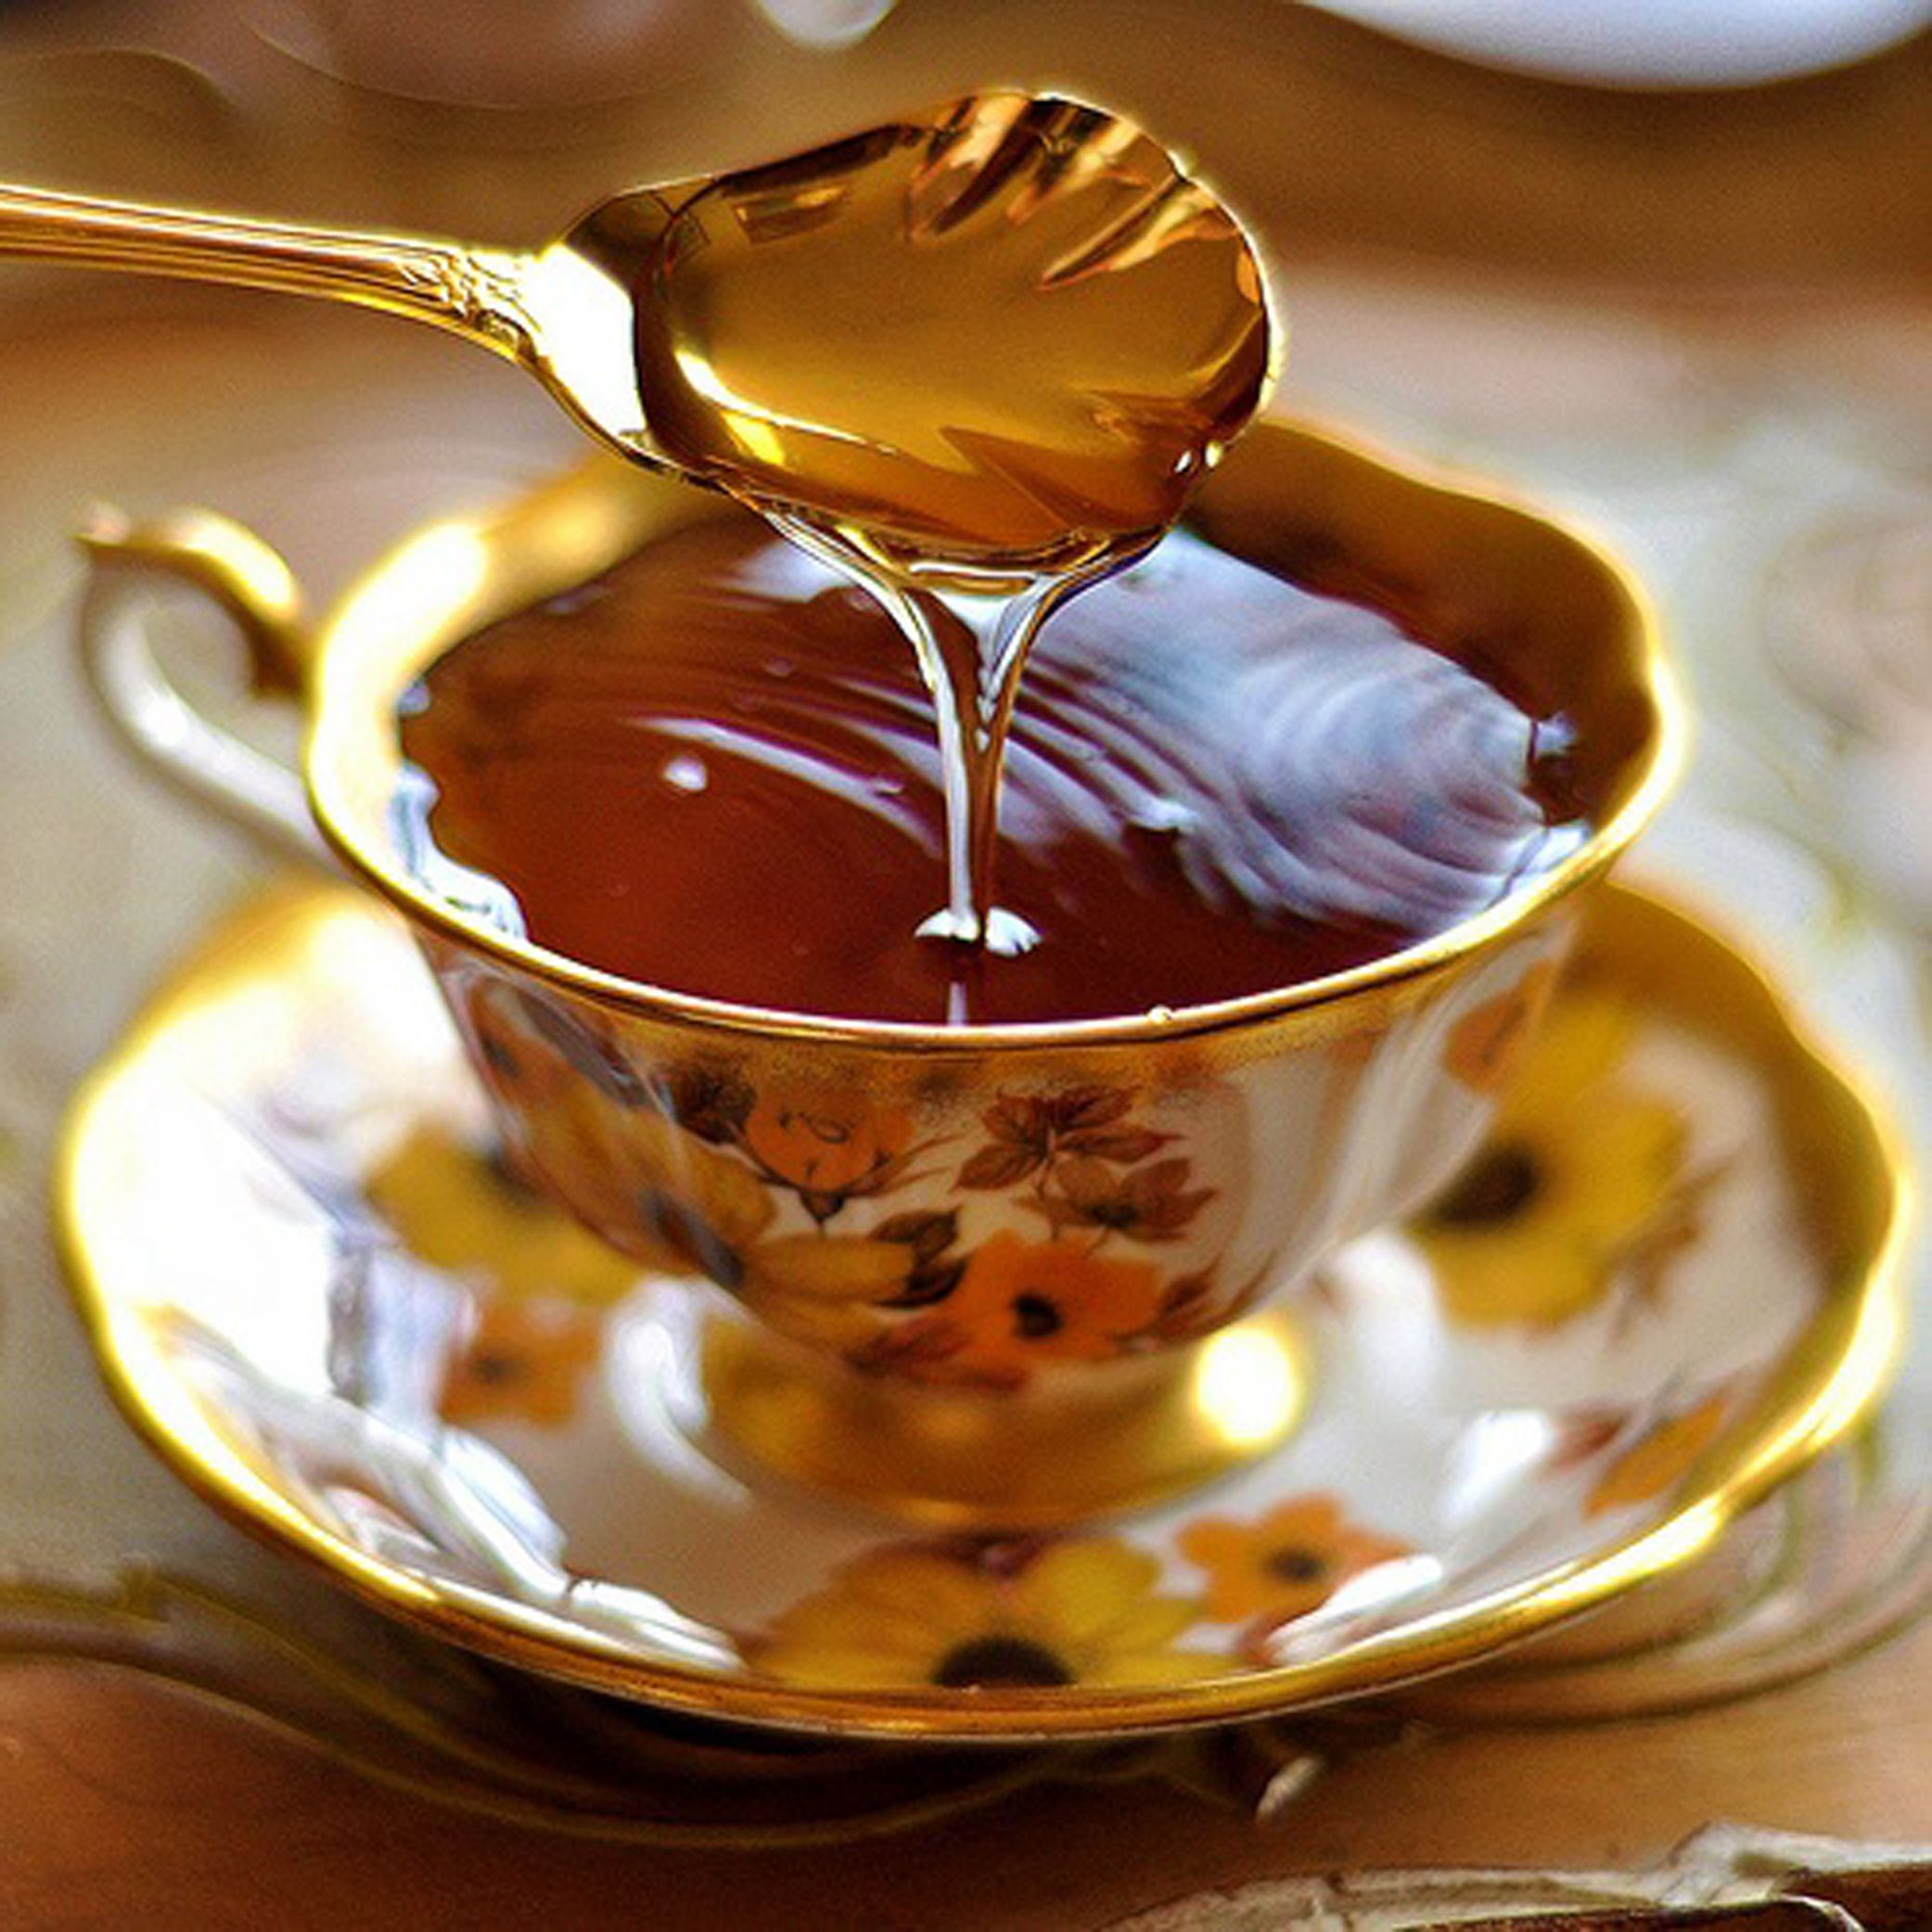 I can feel the soothing warmth... | Tea-quility!! | Pinterest | Tea ...